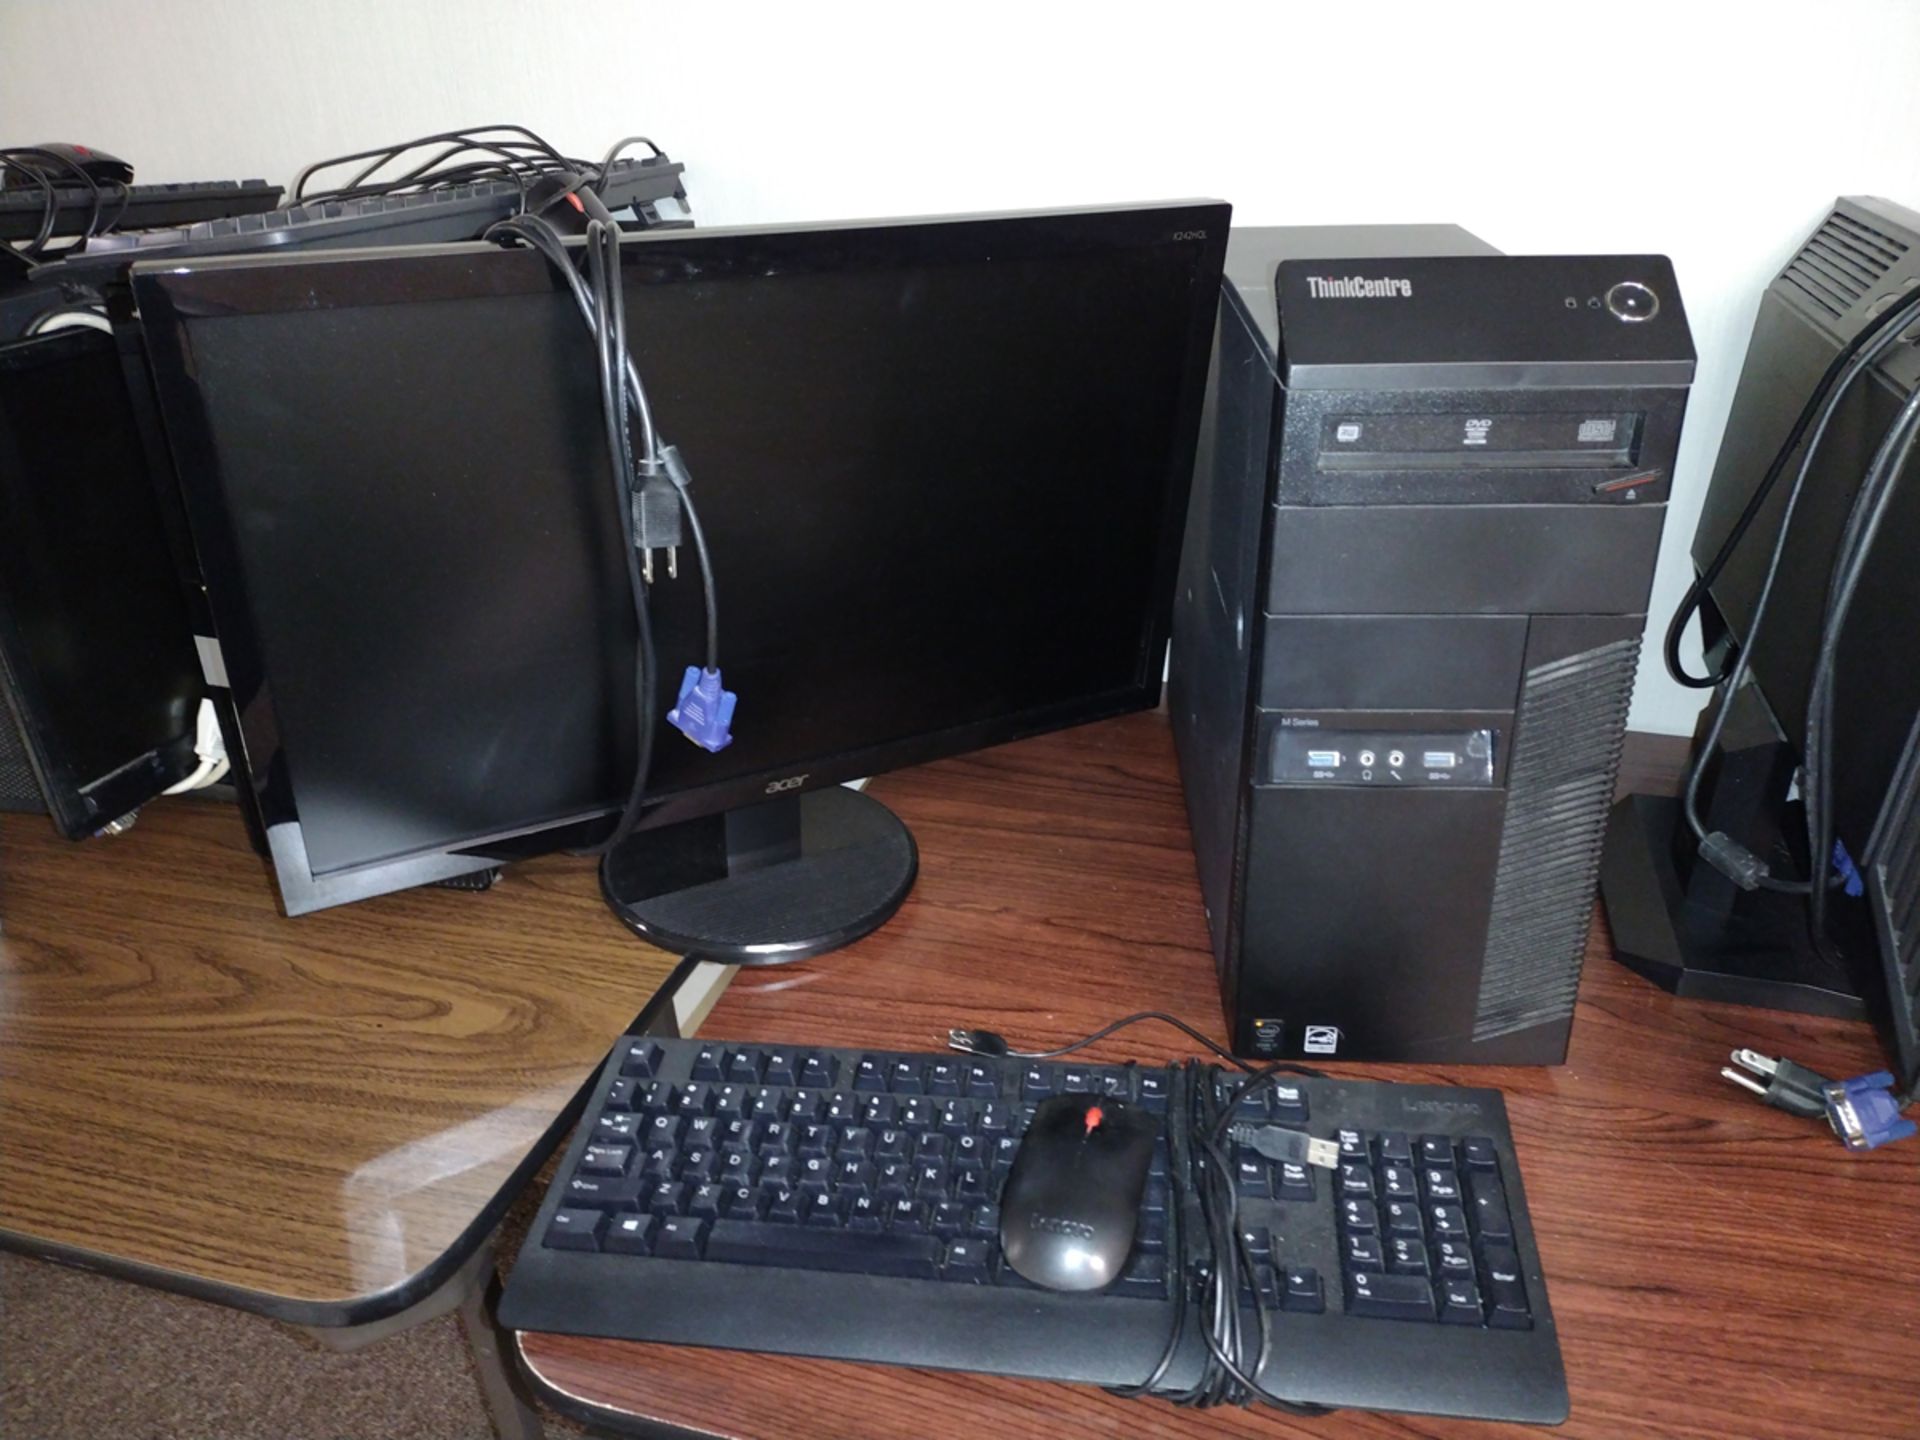 Lenovo M Series ThinkCentre i7 PC w/ Monitor and Keyboard